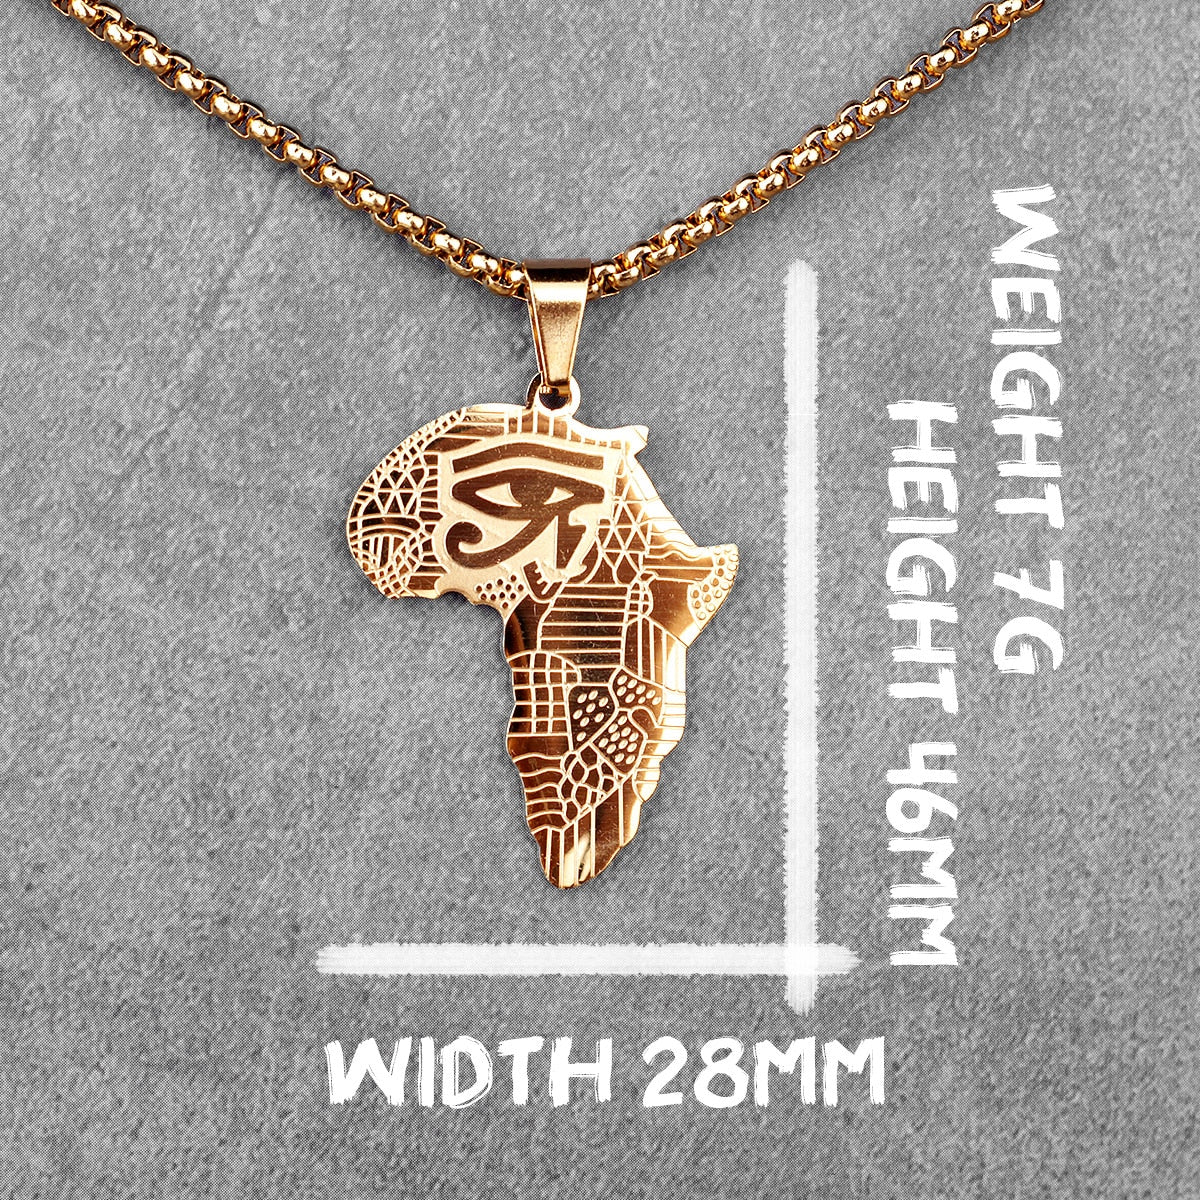 Golden Safari: Bold Africa Map Necklace for Men Stainless Steel Pendant Chain - Flexi Africa - Free Delivery Worldwide